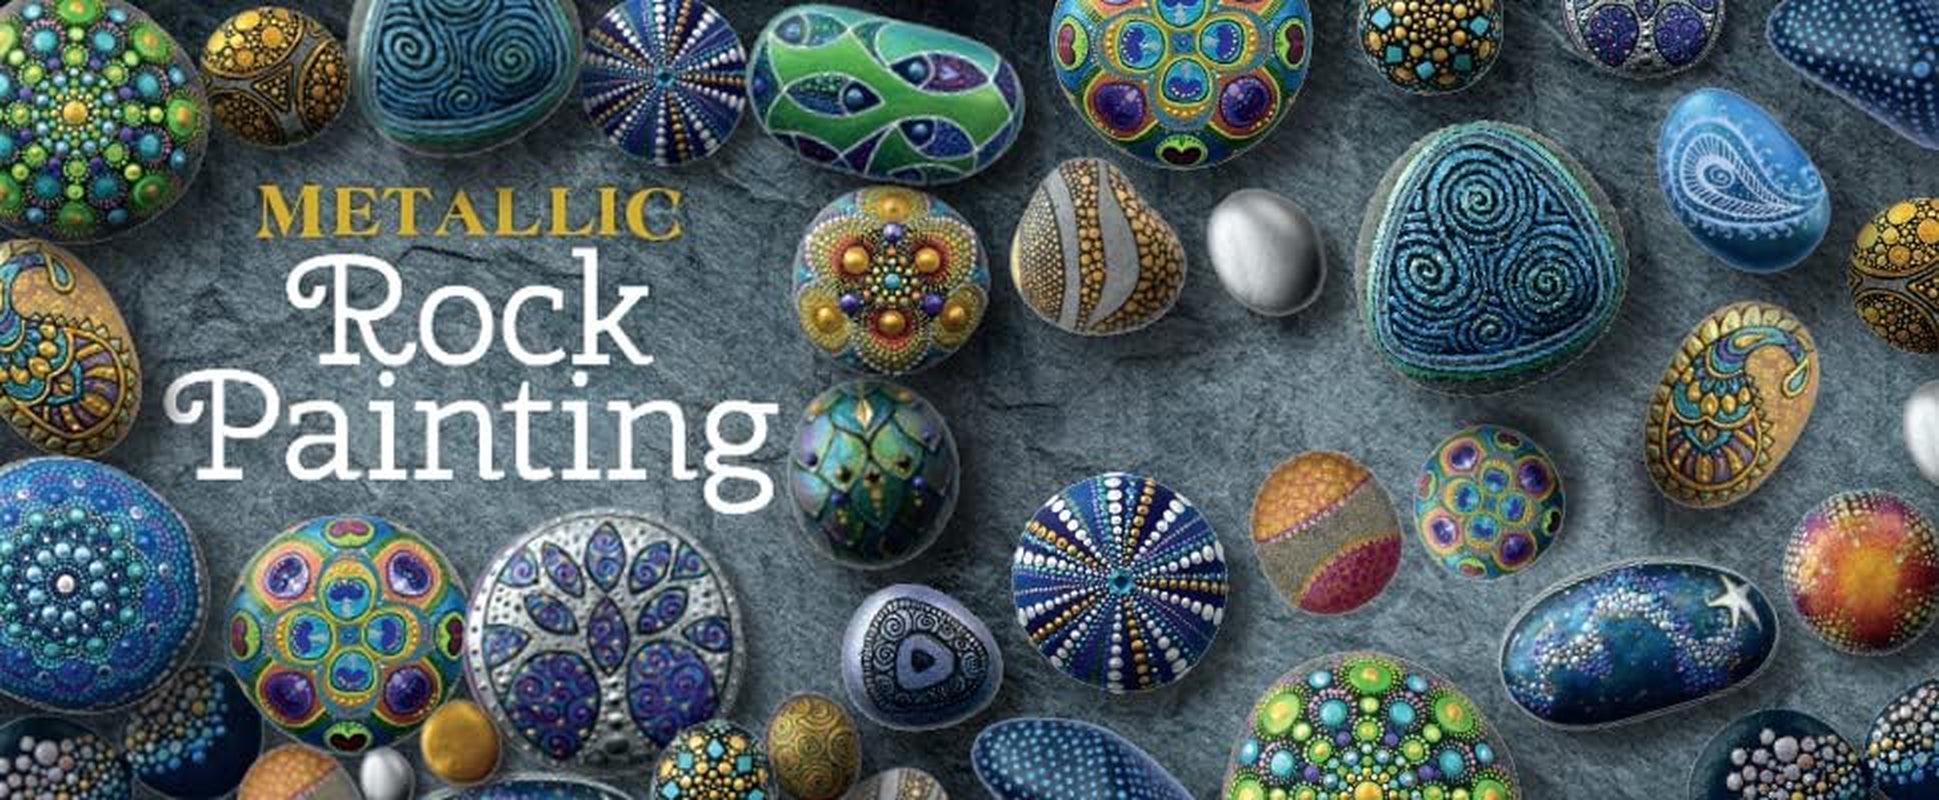 Metallic Rock Painting Box Set - DIY Rock Painting for Adults - Rocks, Brush, Paint Included - WoodArtSupply